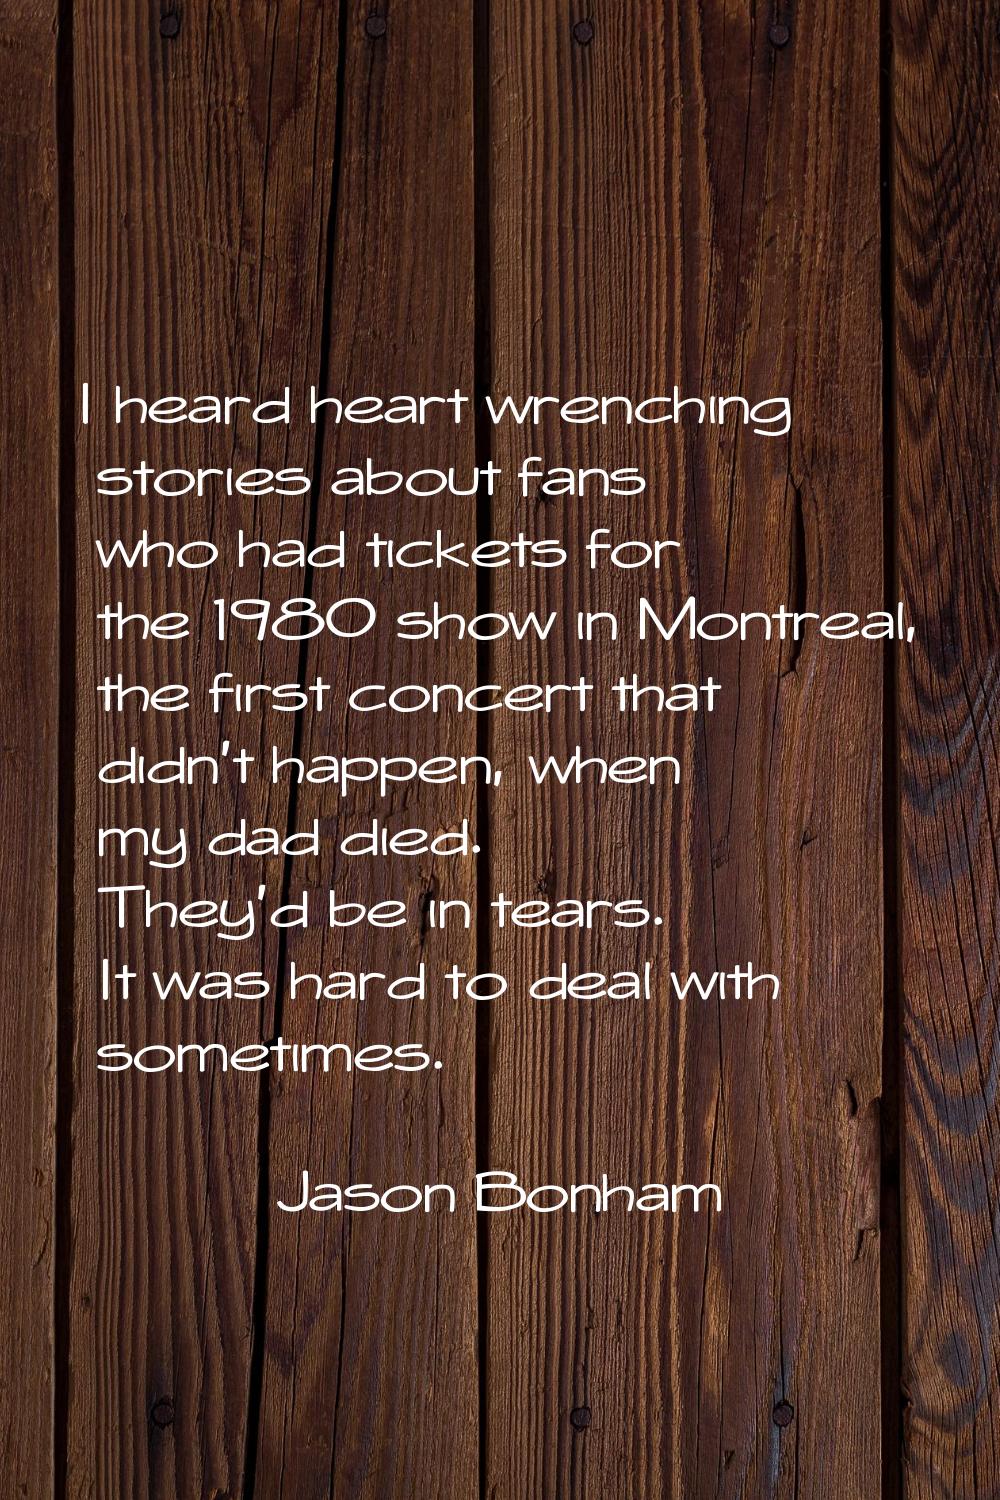 I heard heart wrenching stories about fans who had tickets for the 1980 show in Montreal, the first